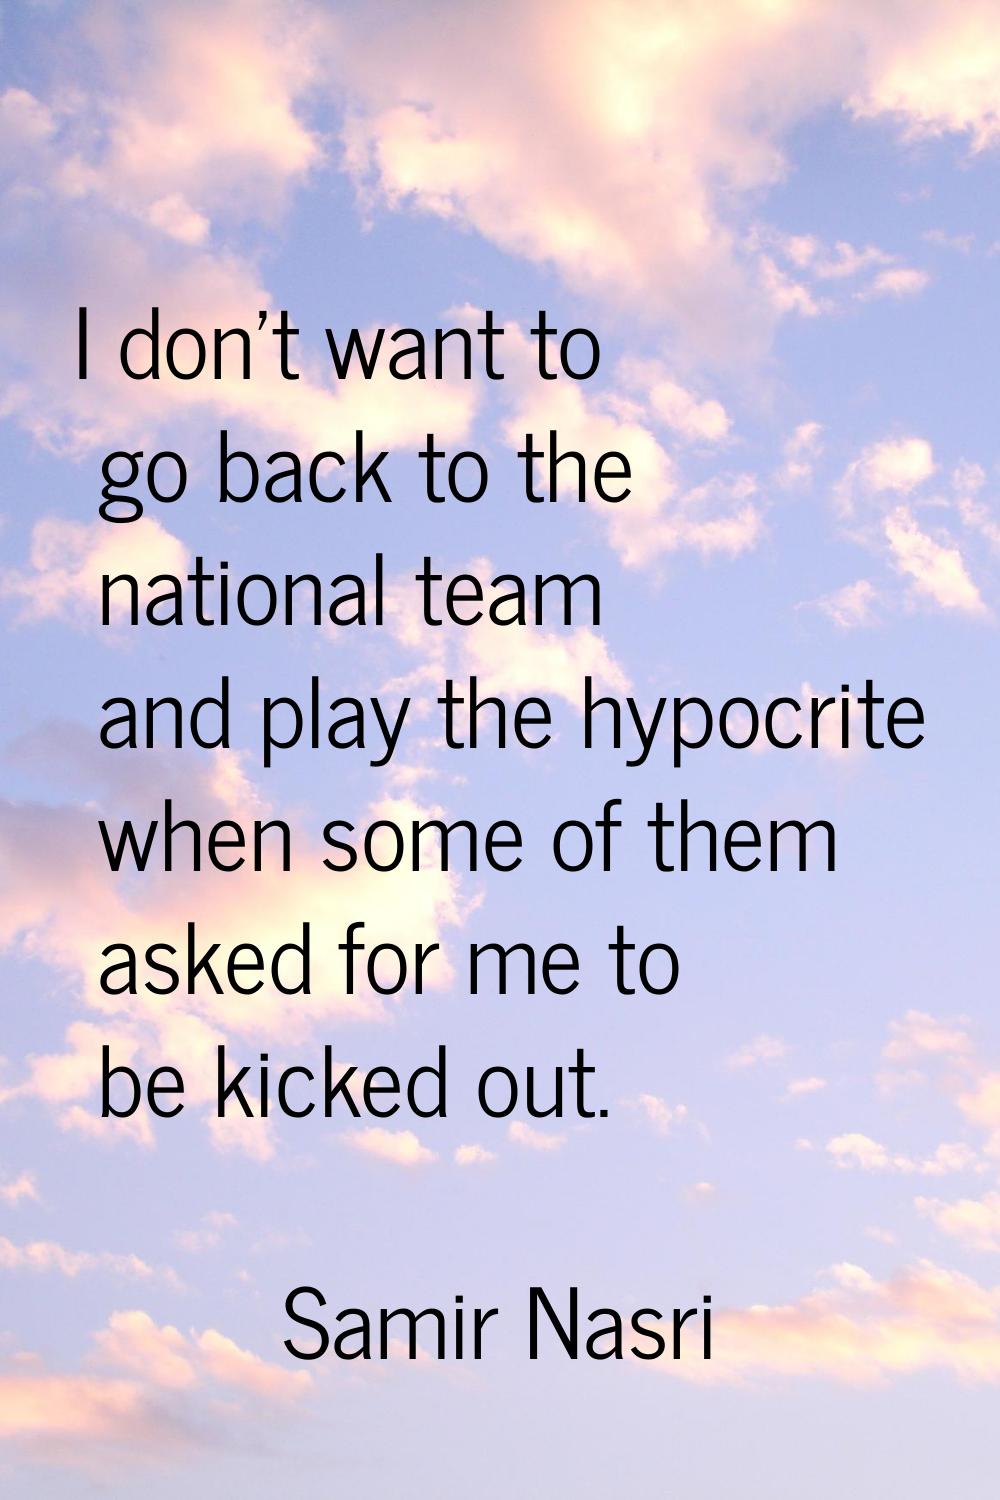 I don't want to go back to the national team and play the hypocrite when some of them asked for me 